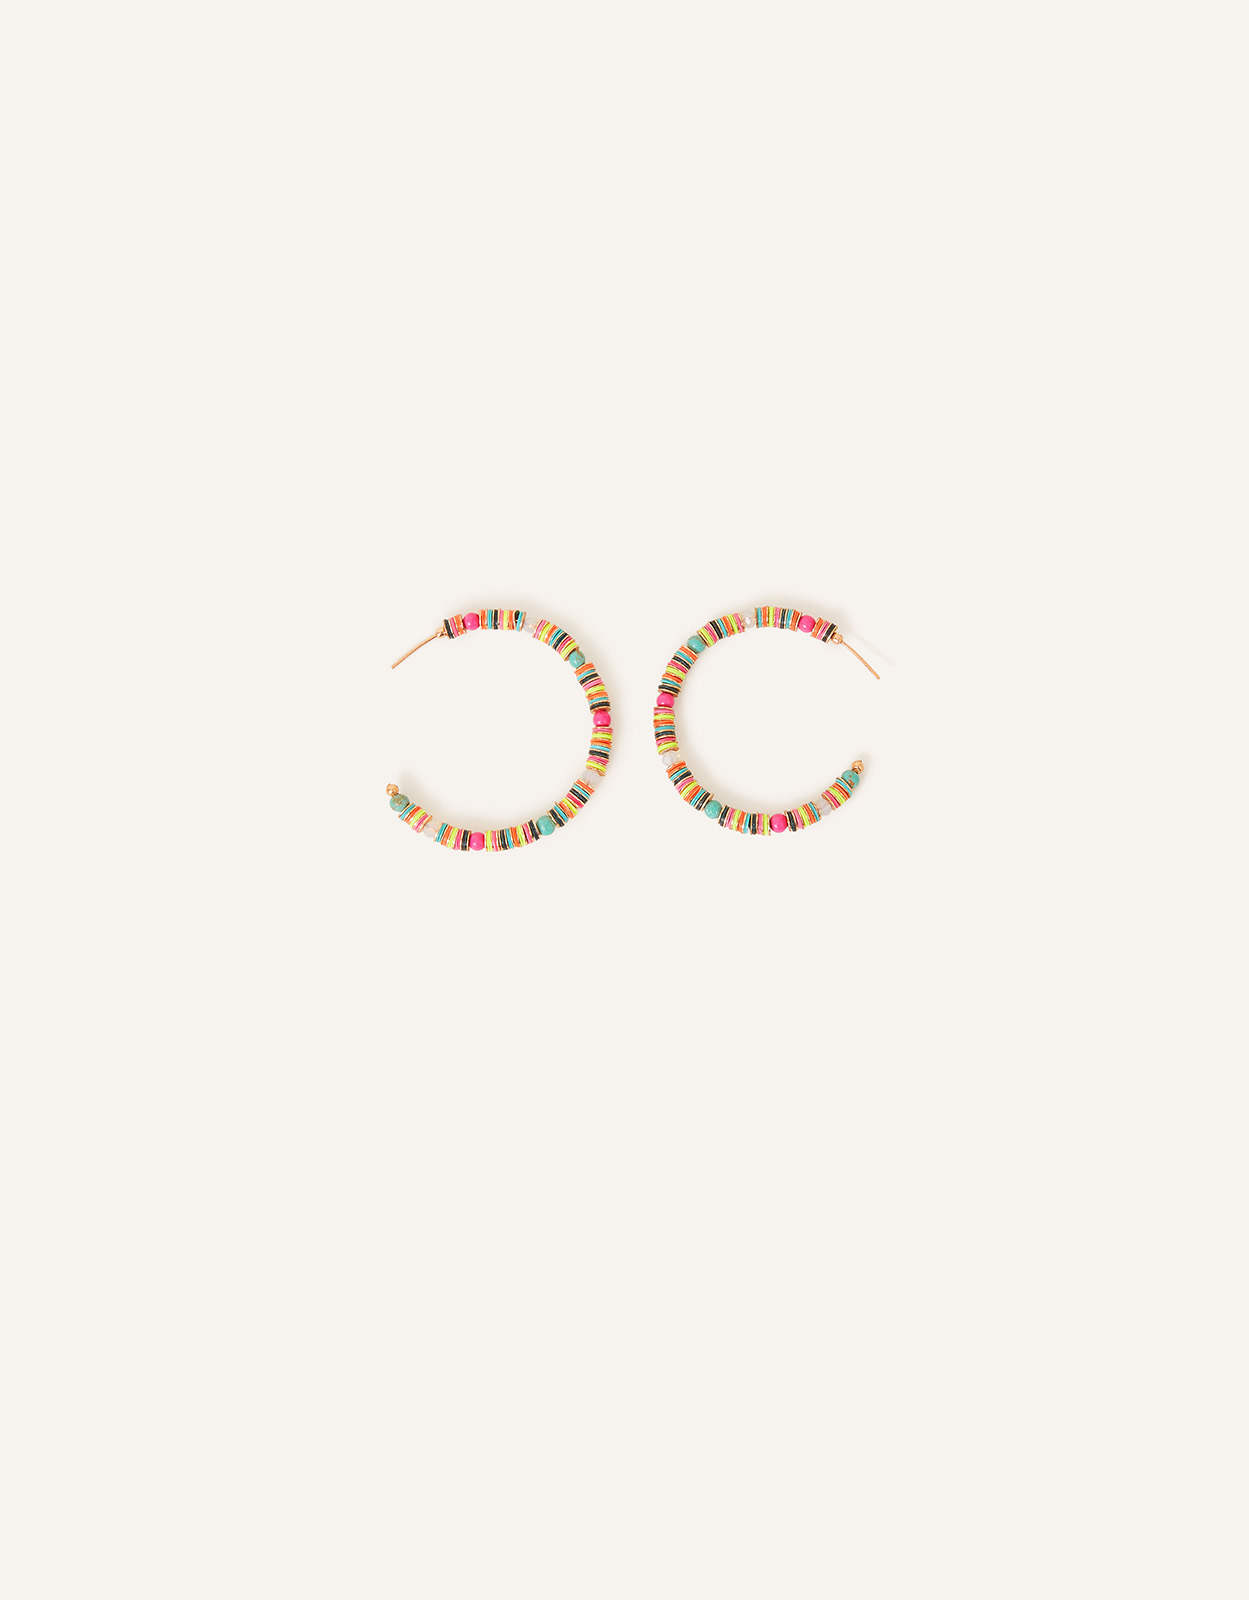 Accessorize Women's Gold, Orange and Green Bright Disc Beaded Hoops, Size: 5cm